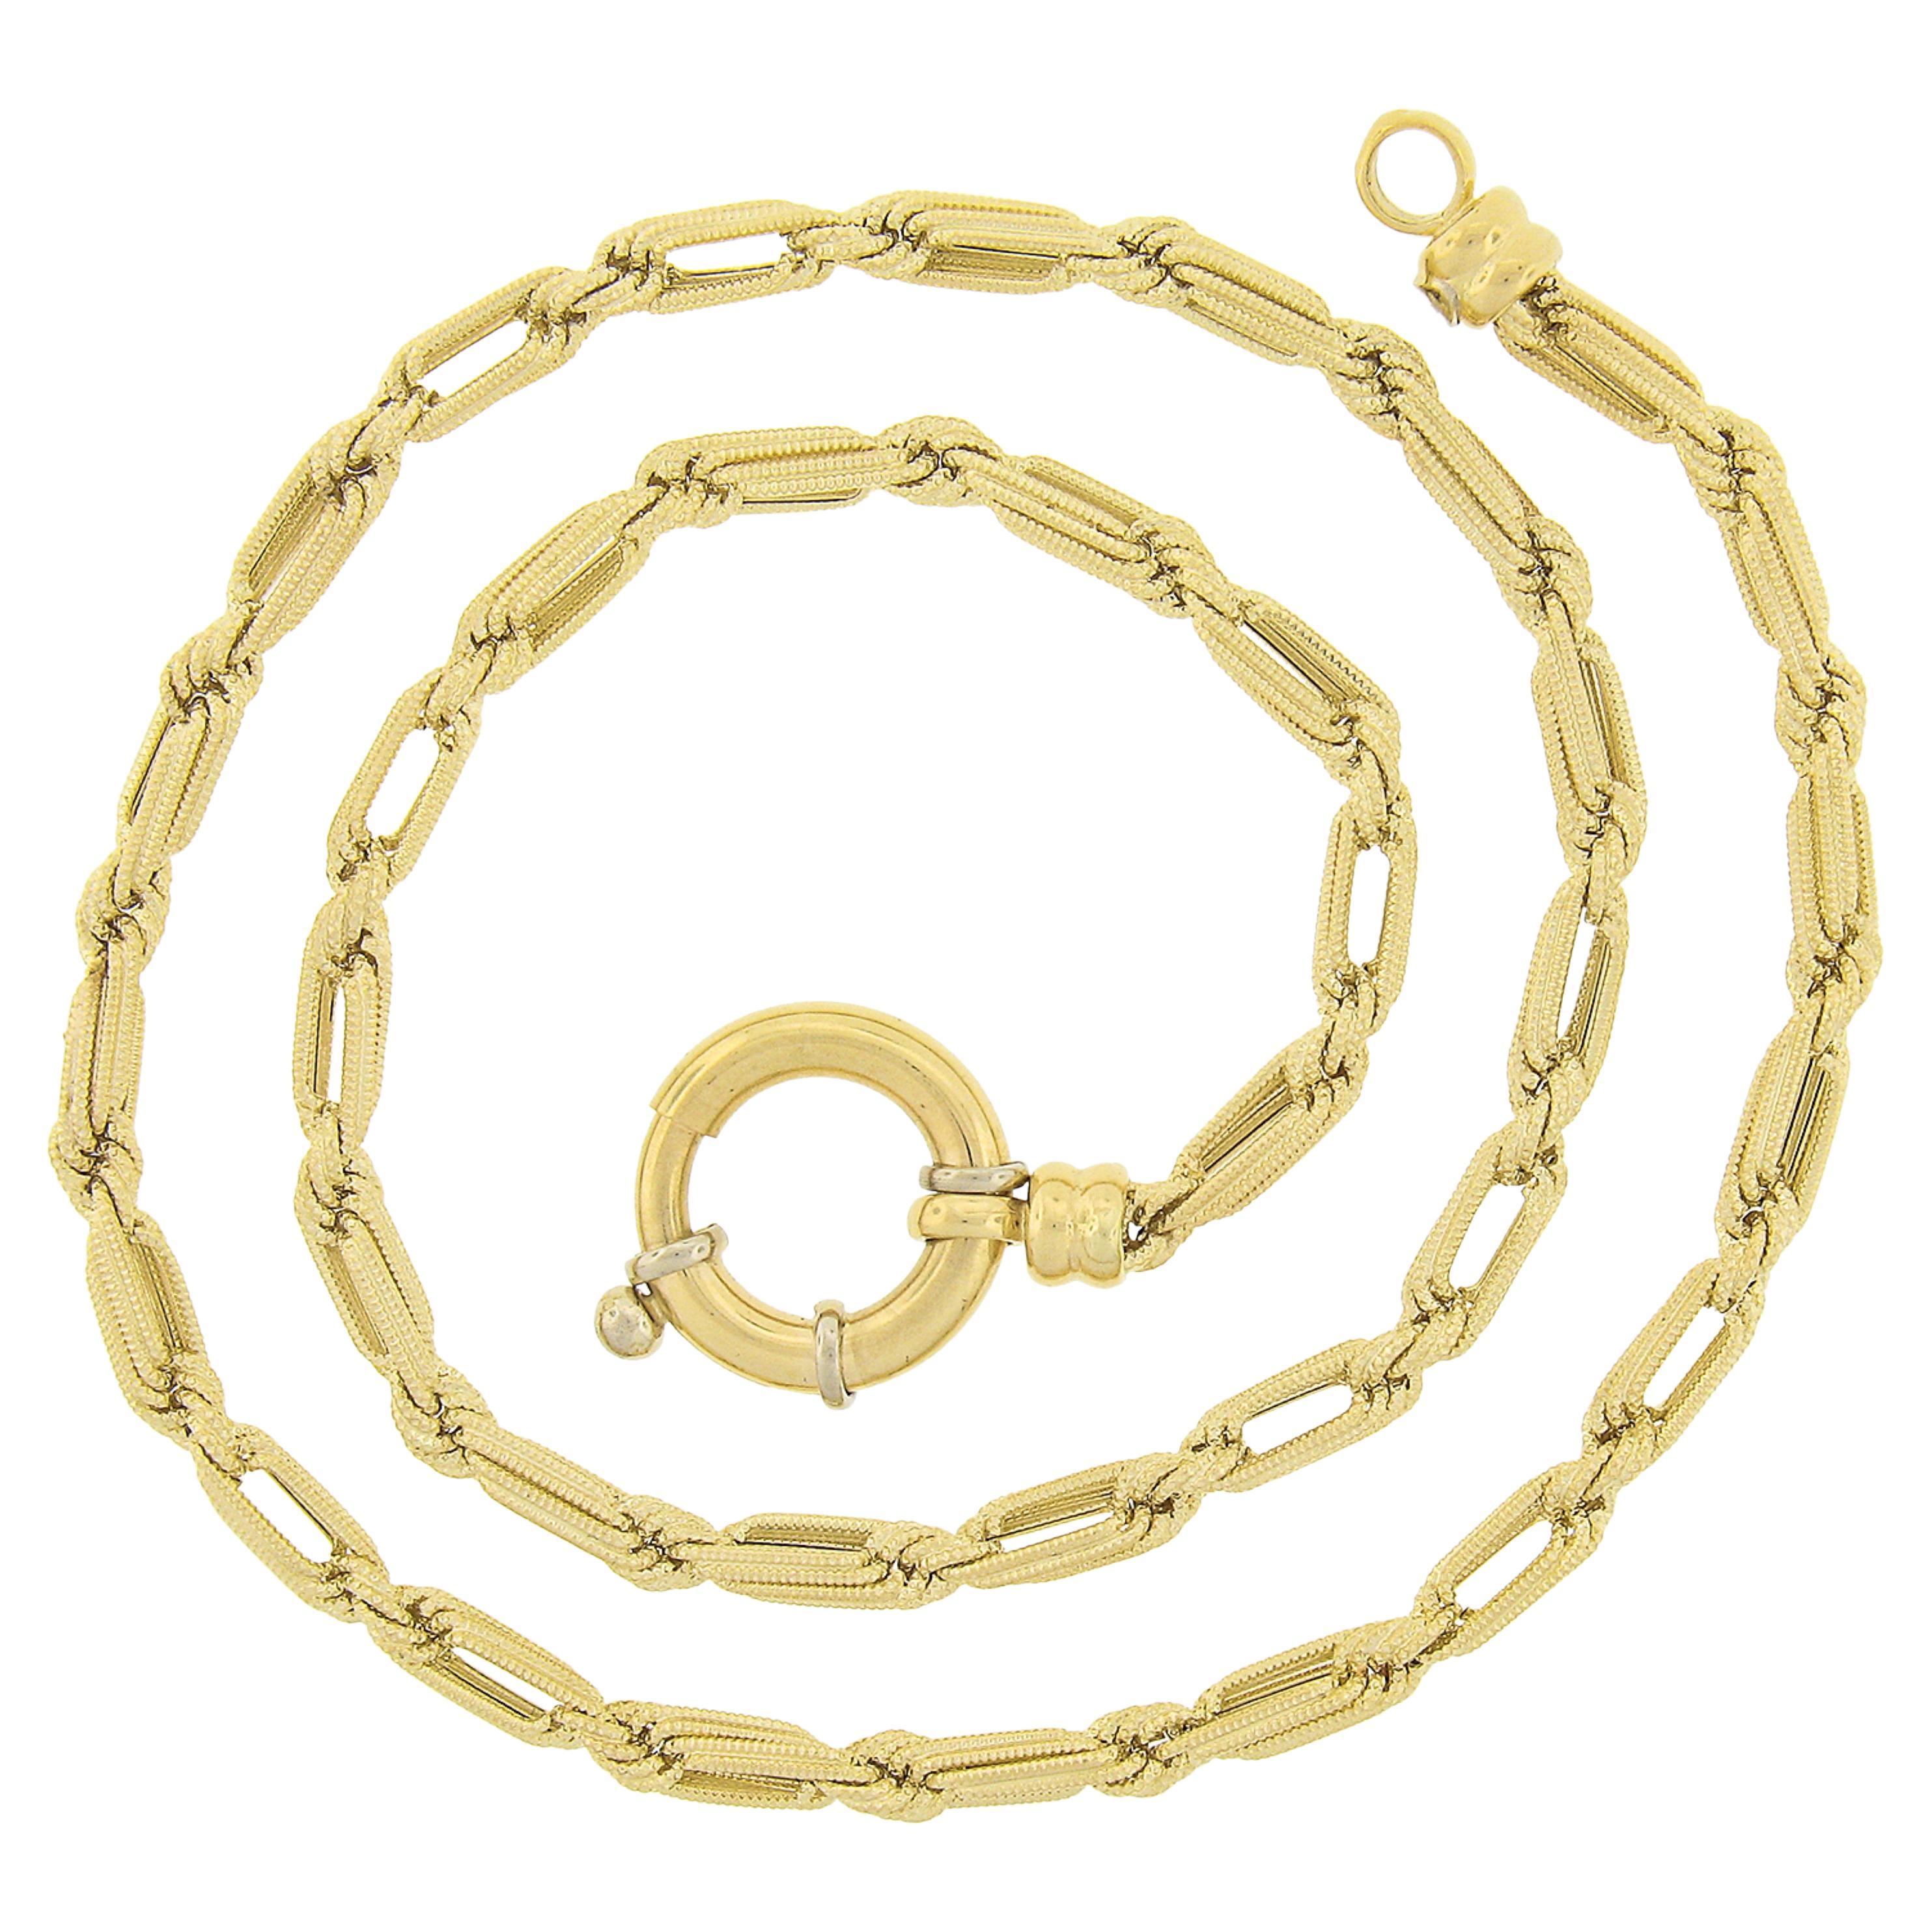 14k Gold 18" Textured Rope Style Link Chain Necklace w/ Large Spring Ring Clasp For Sale